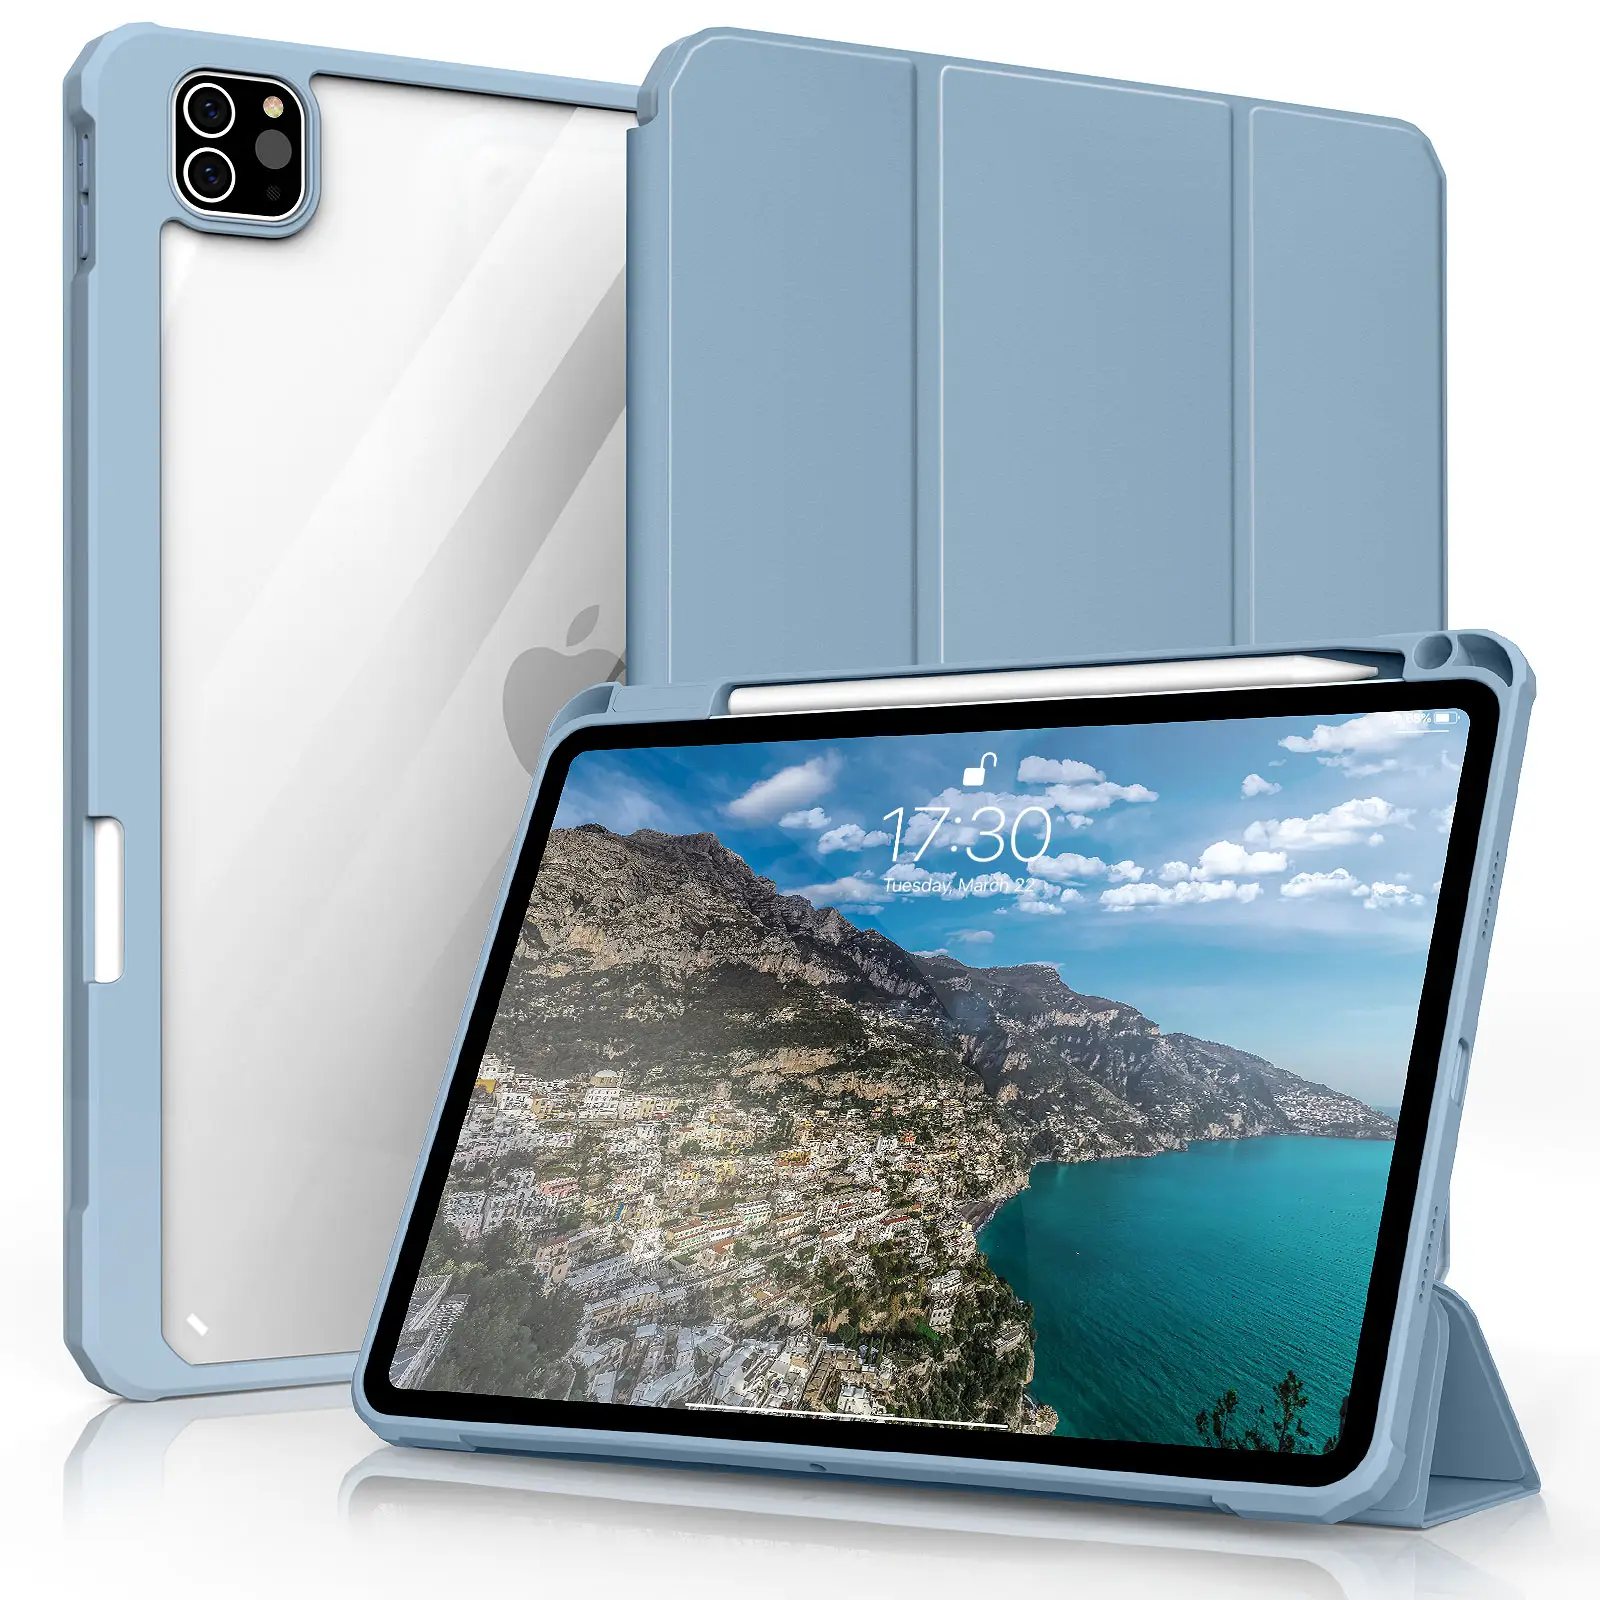 New Designed Ultra Thin Smart Protective Tablet Case For iPad mini 6 With Pen Holder Acrylic Transparent Back for iPad mini 6